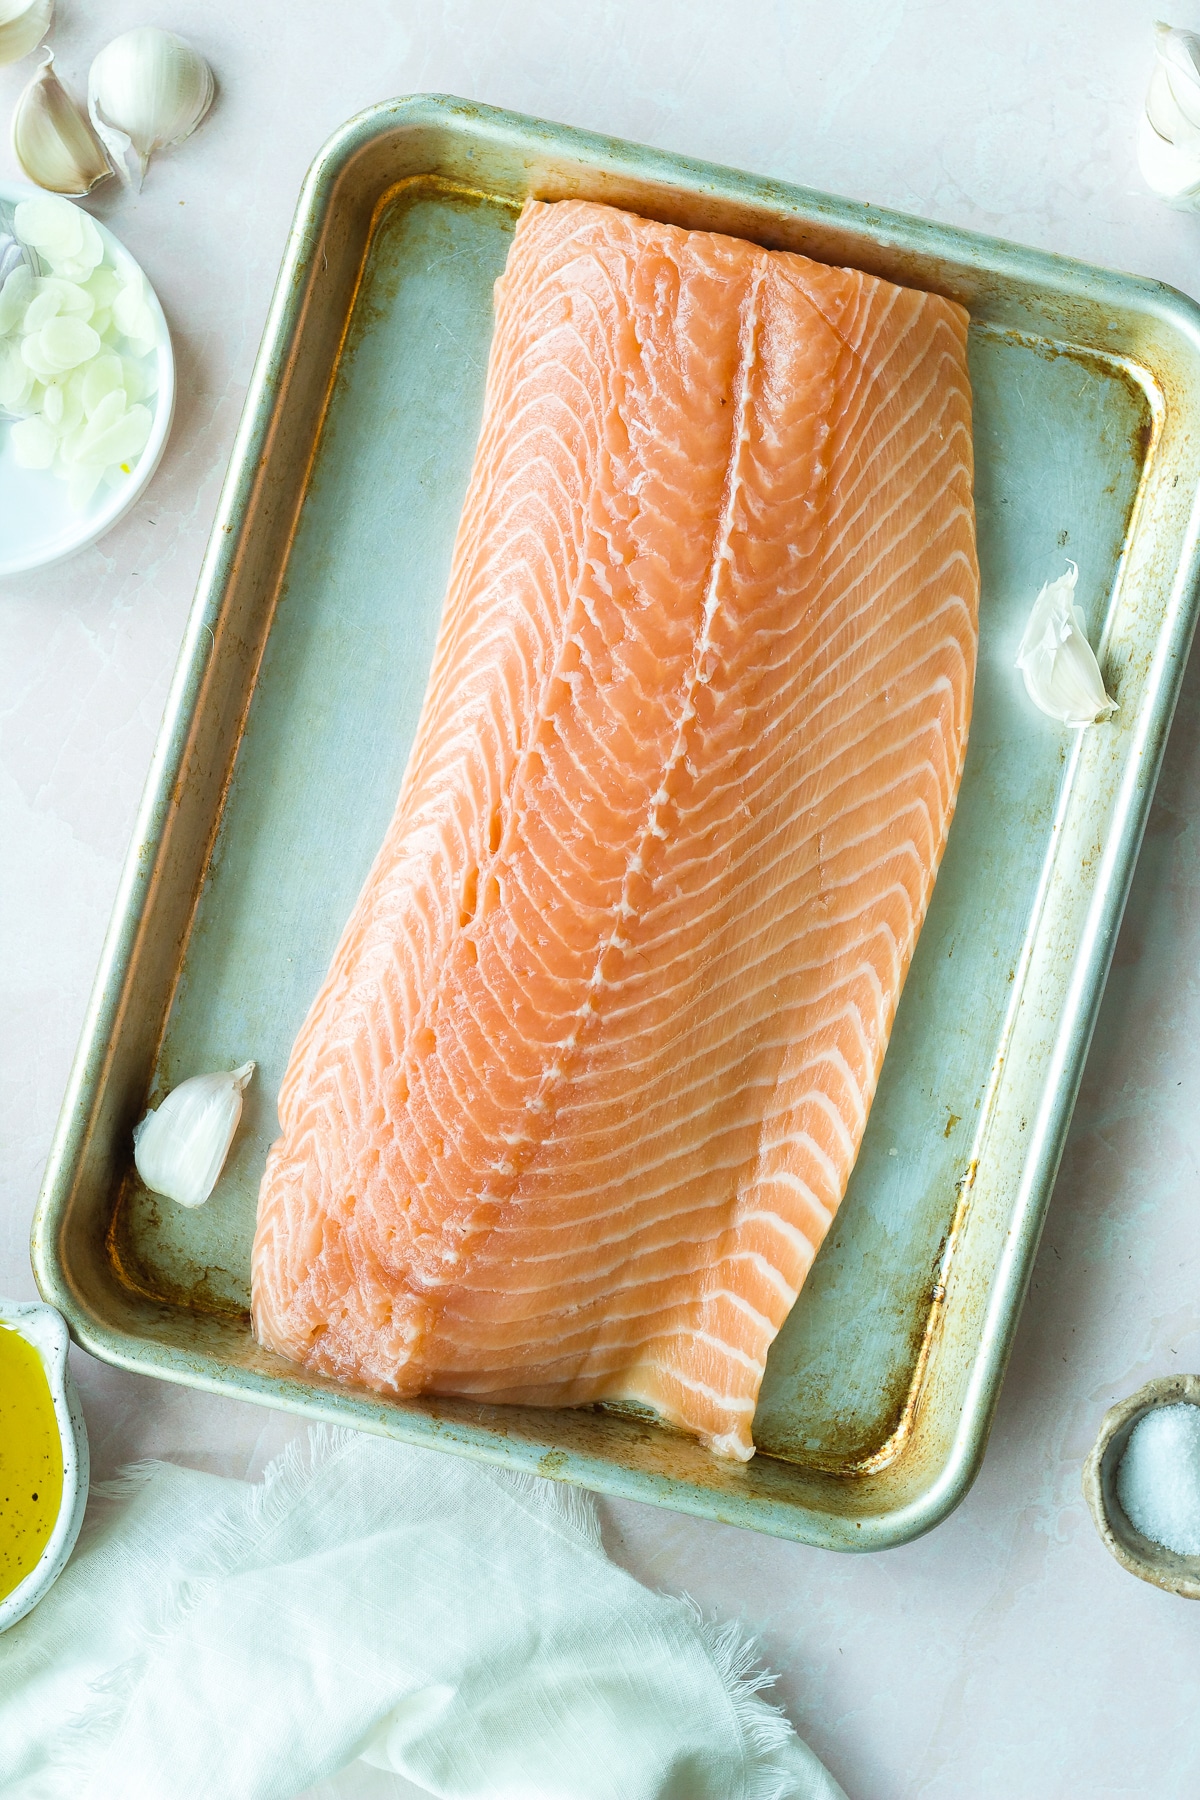 Raw salmon on baking sheet with garlic and small bowl of olive oil on side.